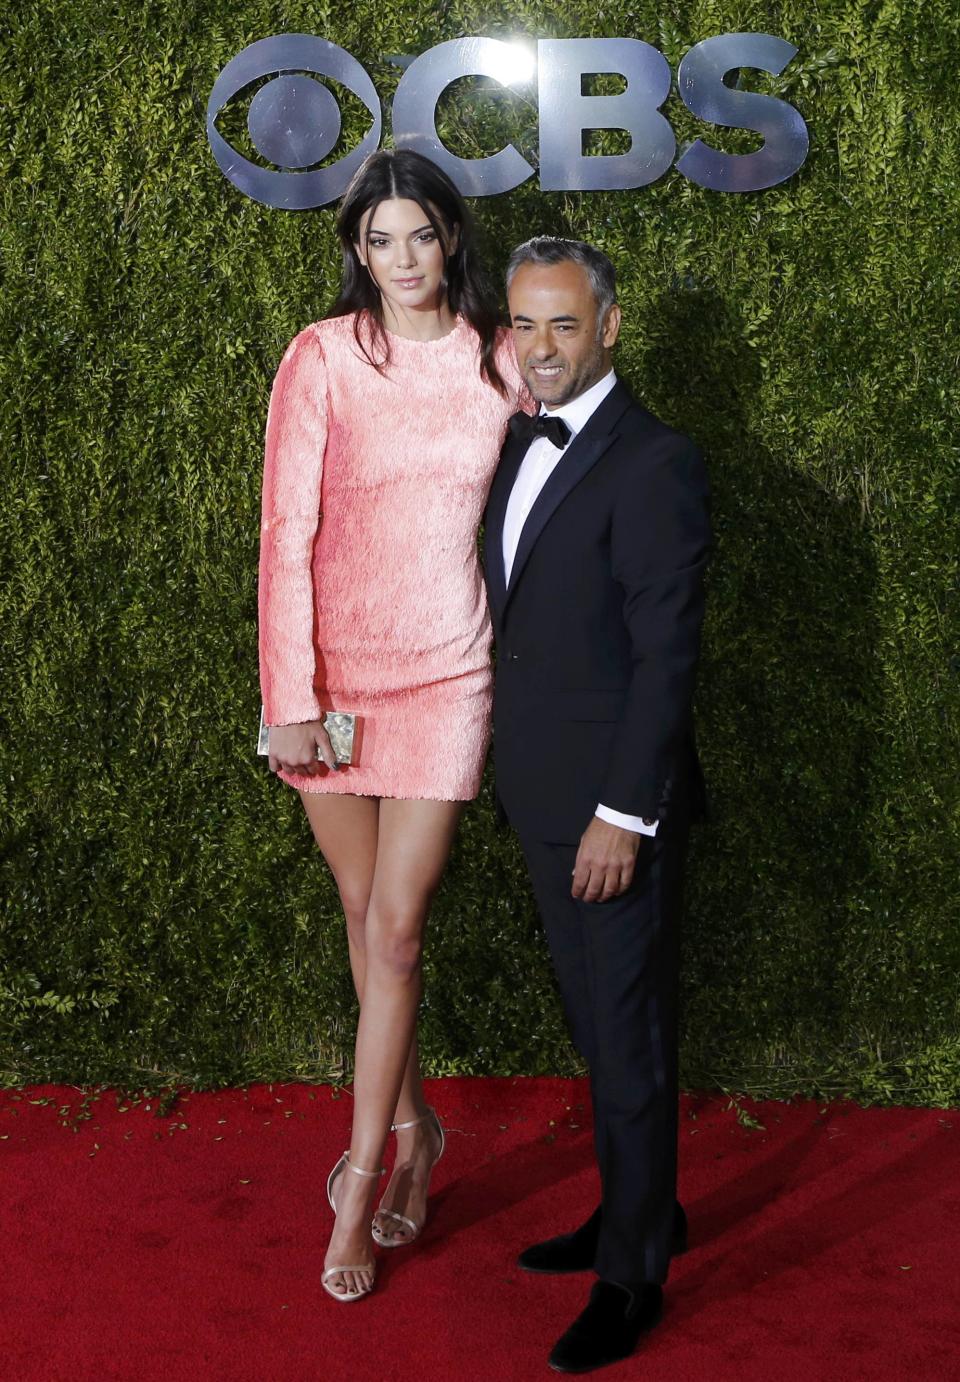 Reality television personality Jenner and fashion designer Zucchelli arrive for the American Theatre Wing's 69th Annual Tony Awards at the Radio City Music Hall in Manhattan